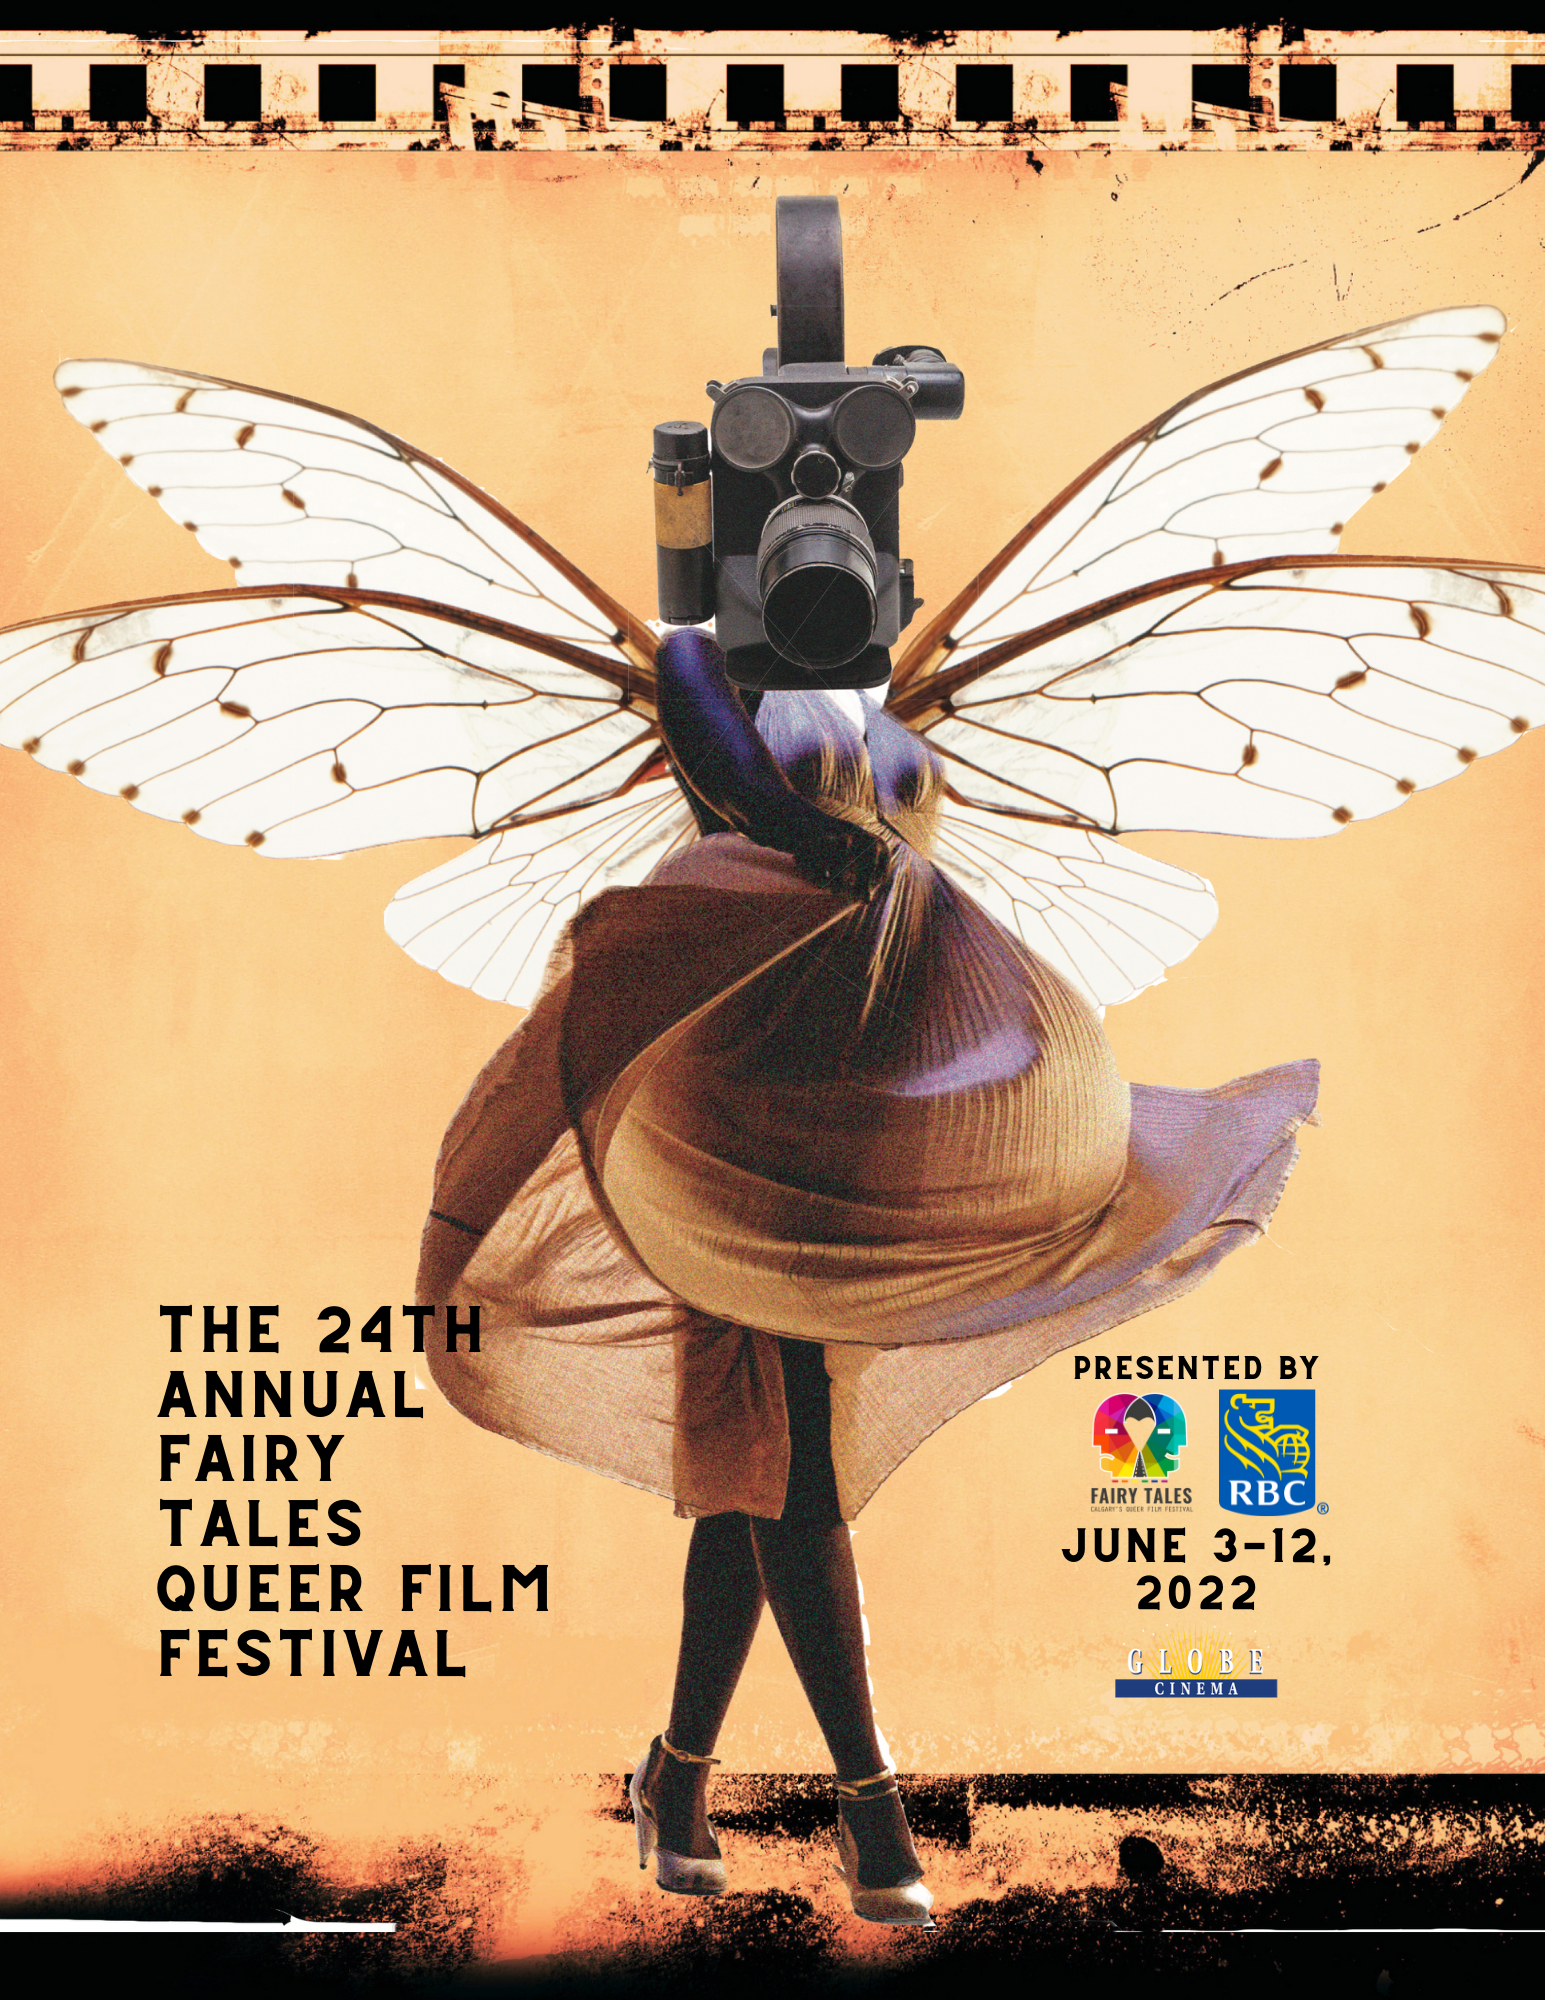 The 2022 poster for the 24th Fairy Tales, Queer Film Festival